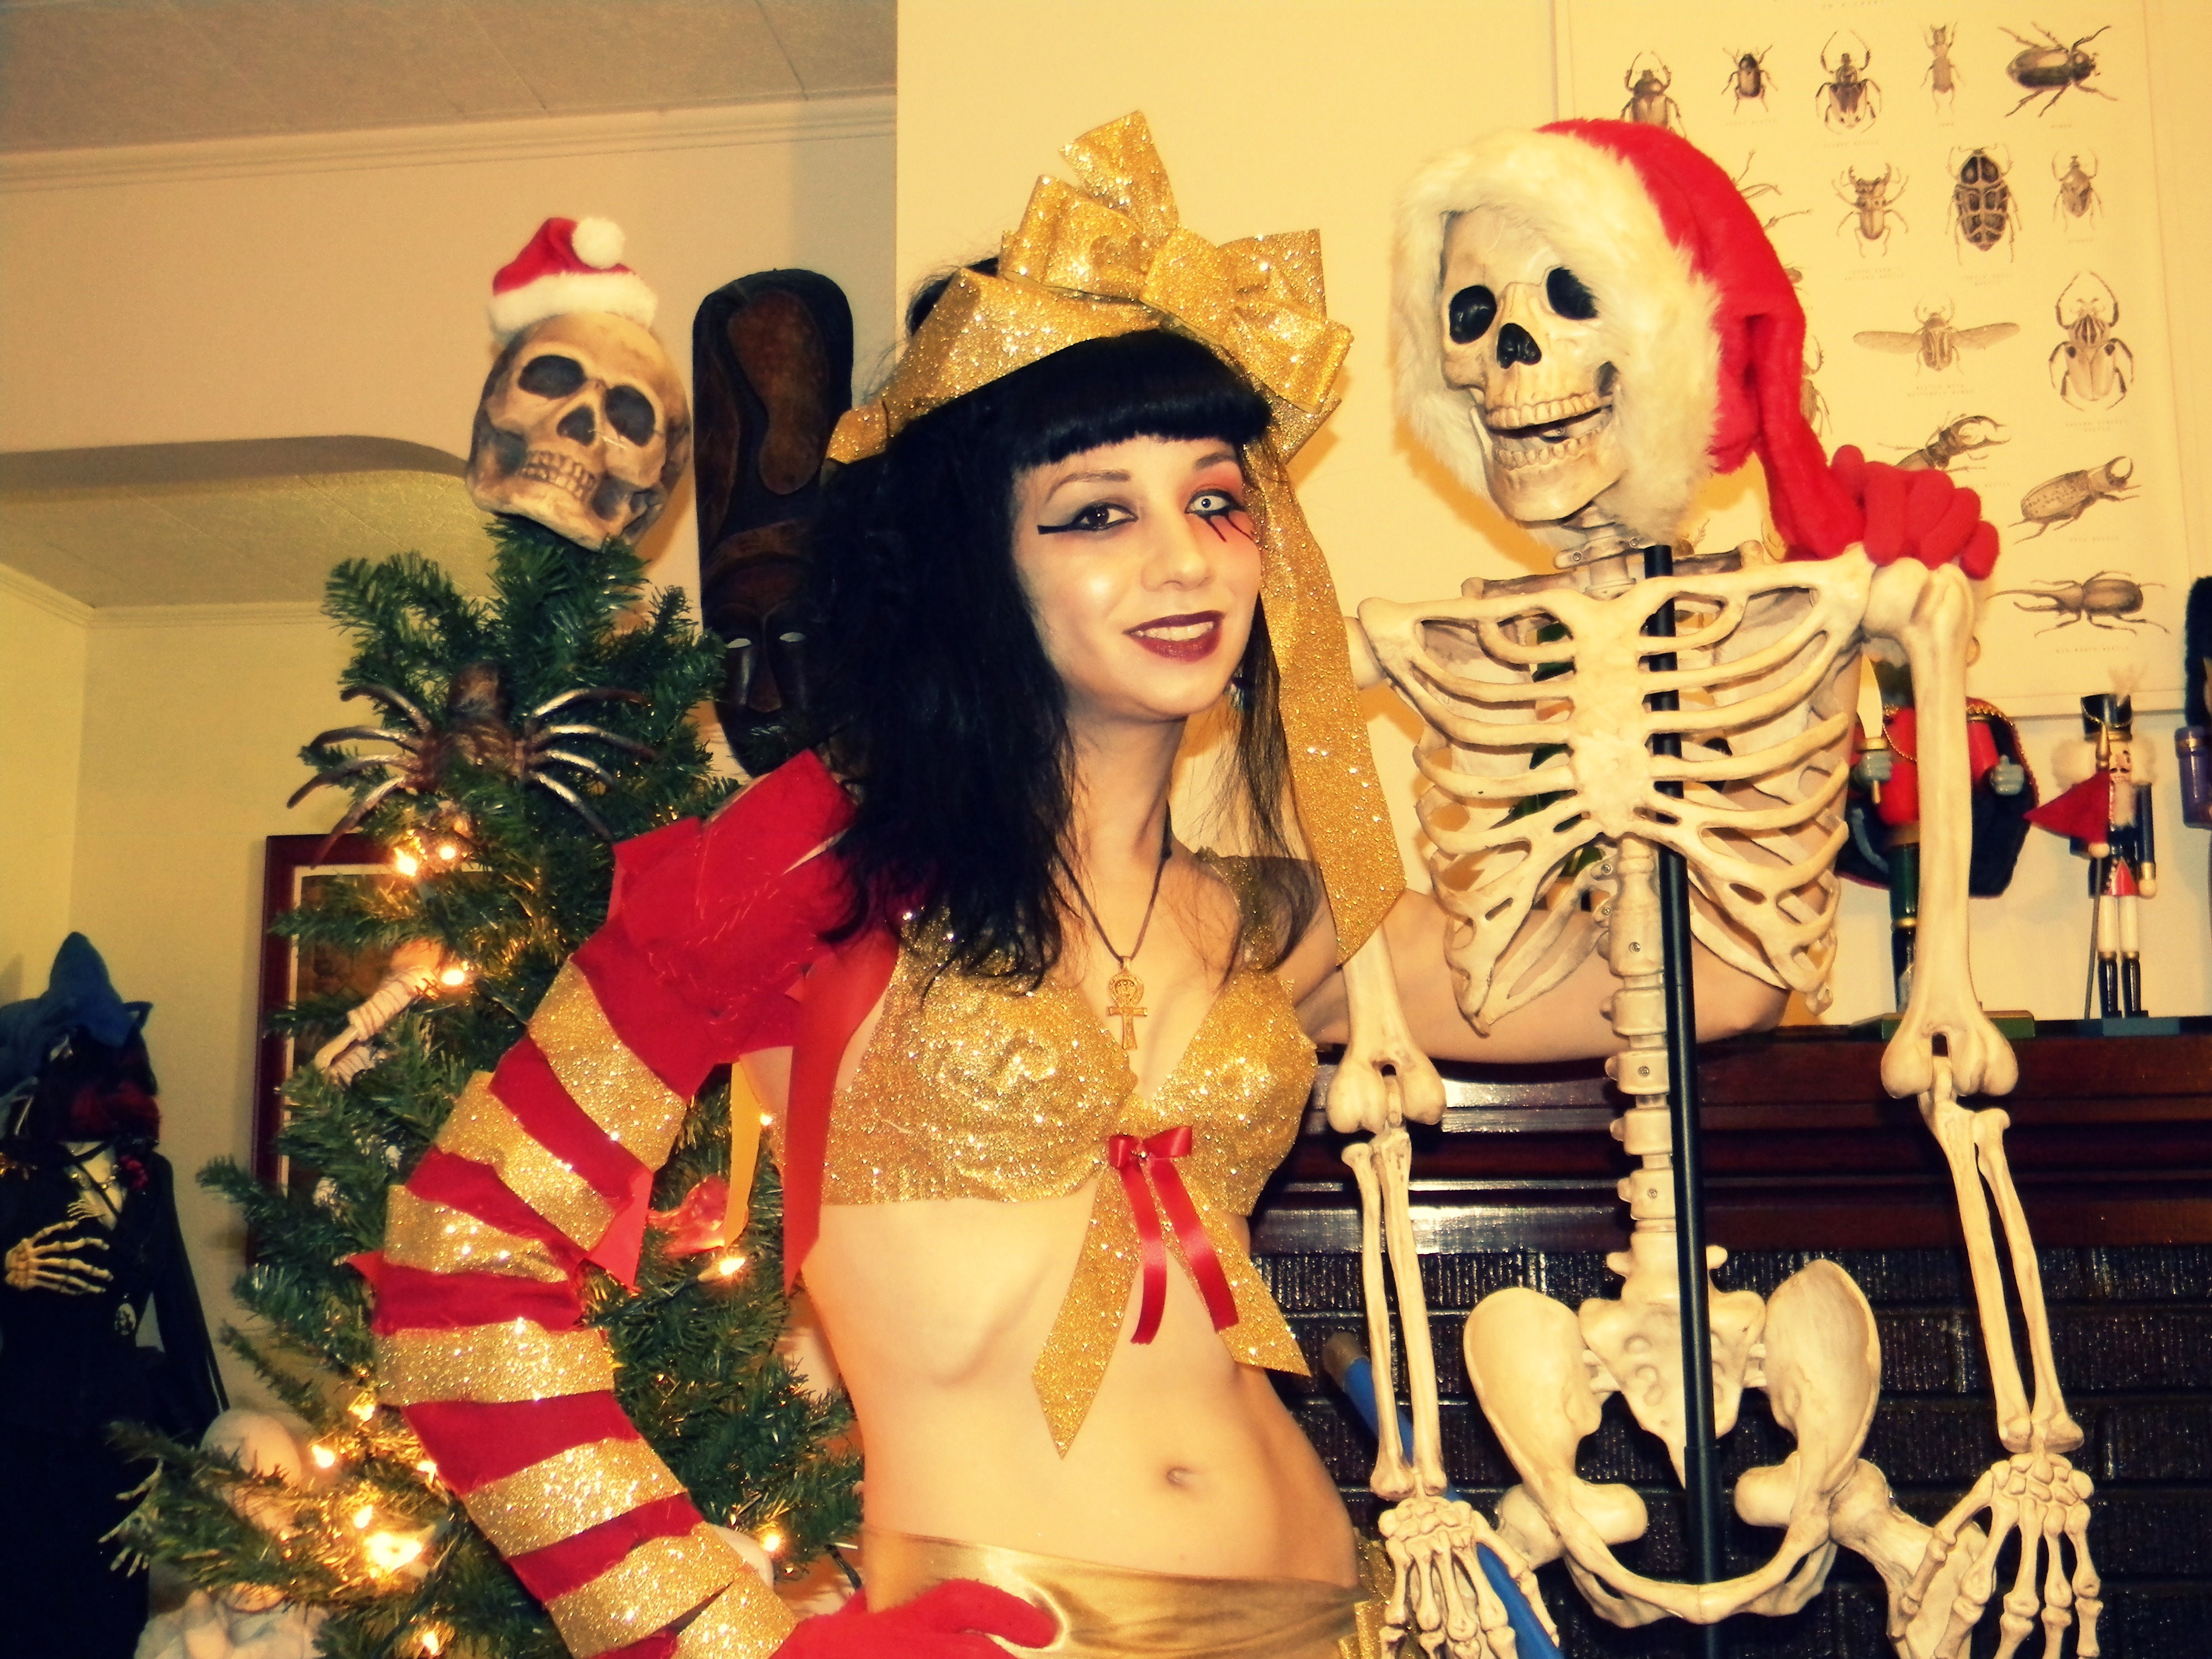 Merry Crypt-mas! Love ~Janet Decay The Daughter of the Ghoul Show